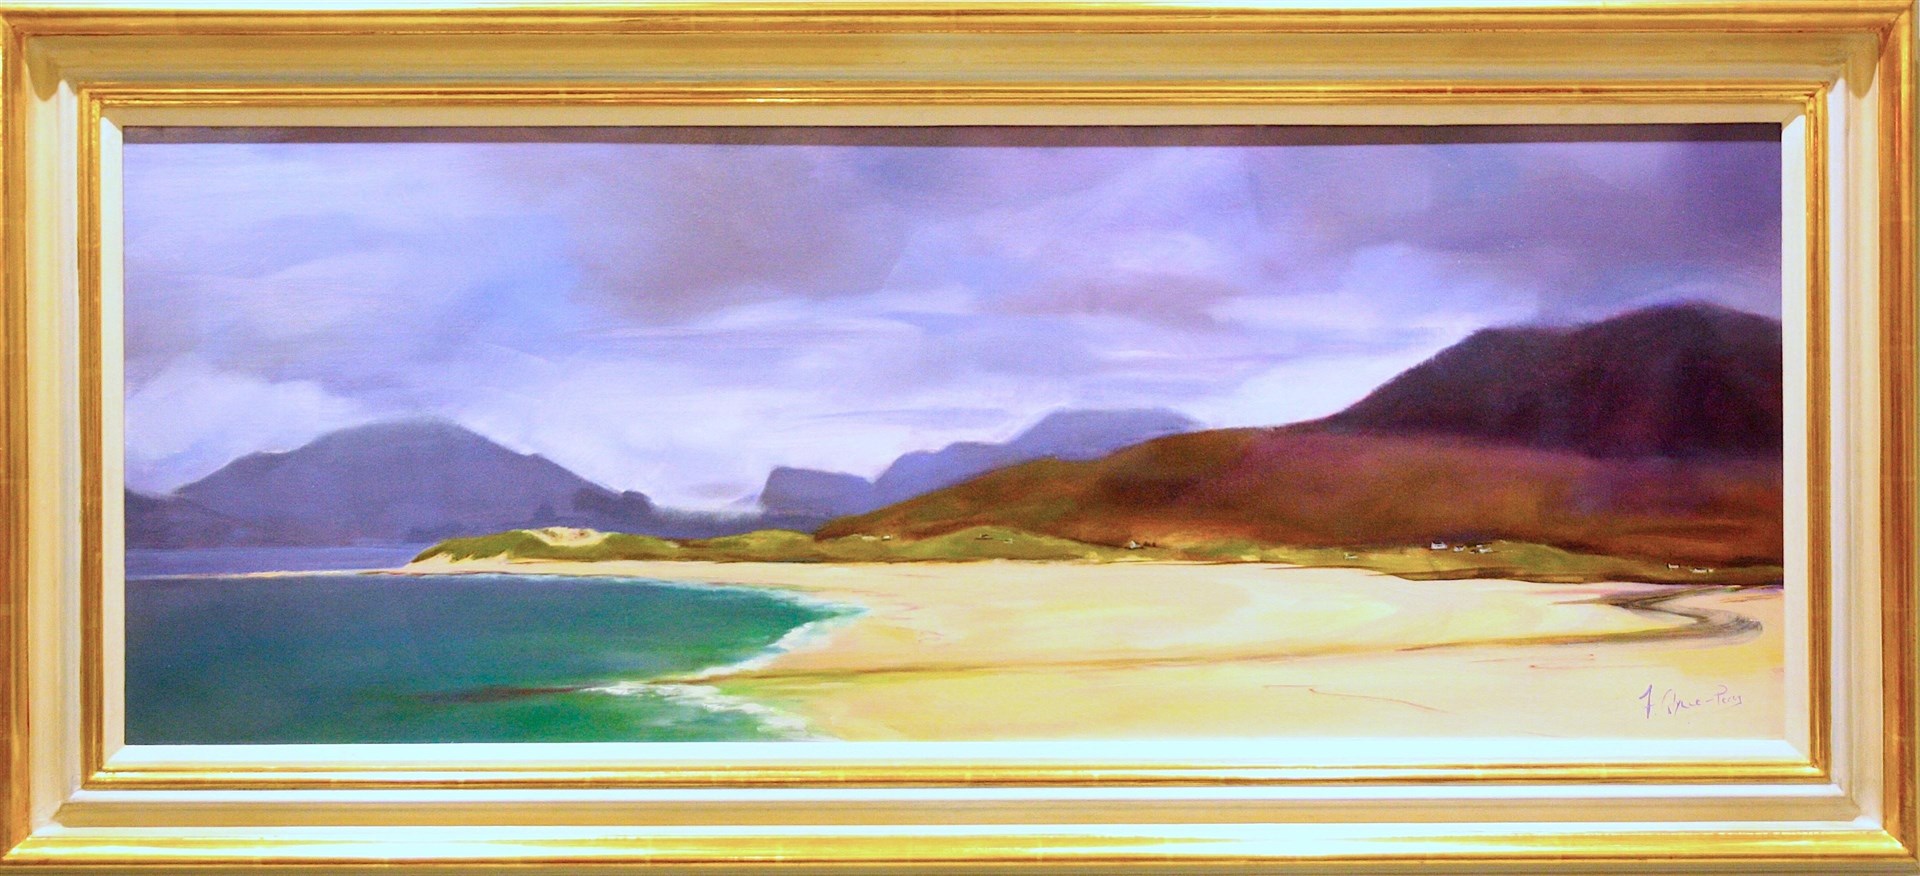 A painting of Seilebost Beach on the Isle of Harris by Fiona Glynne Percy raised £1500.